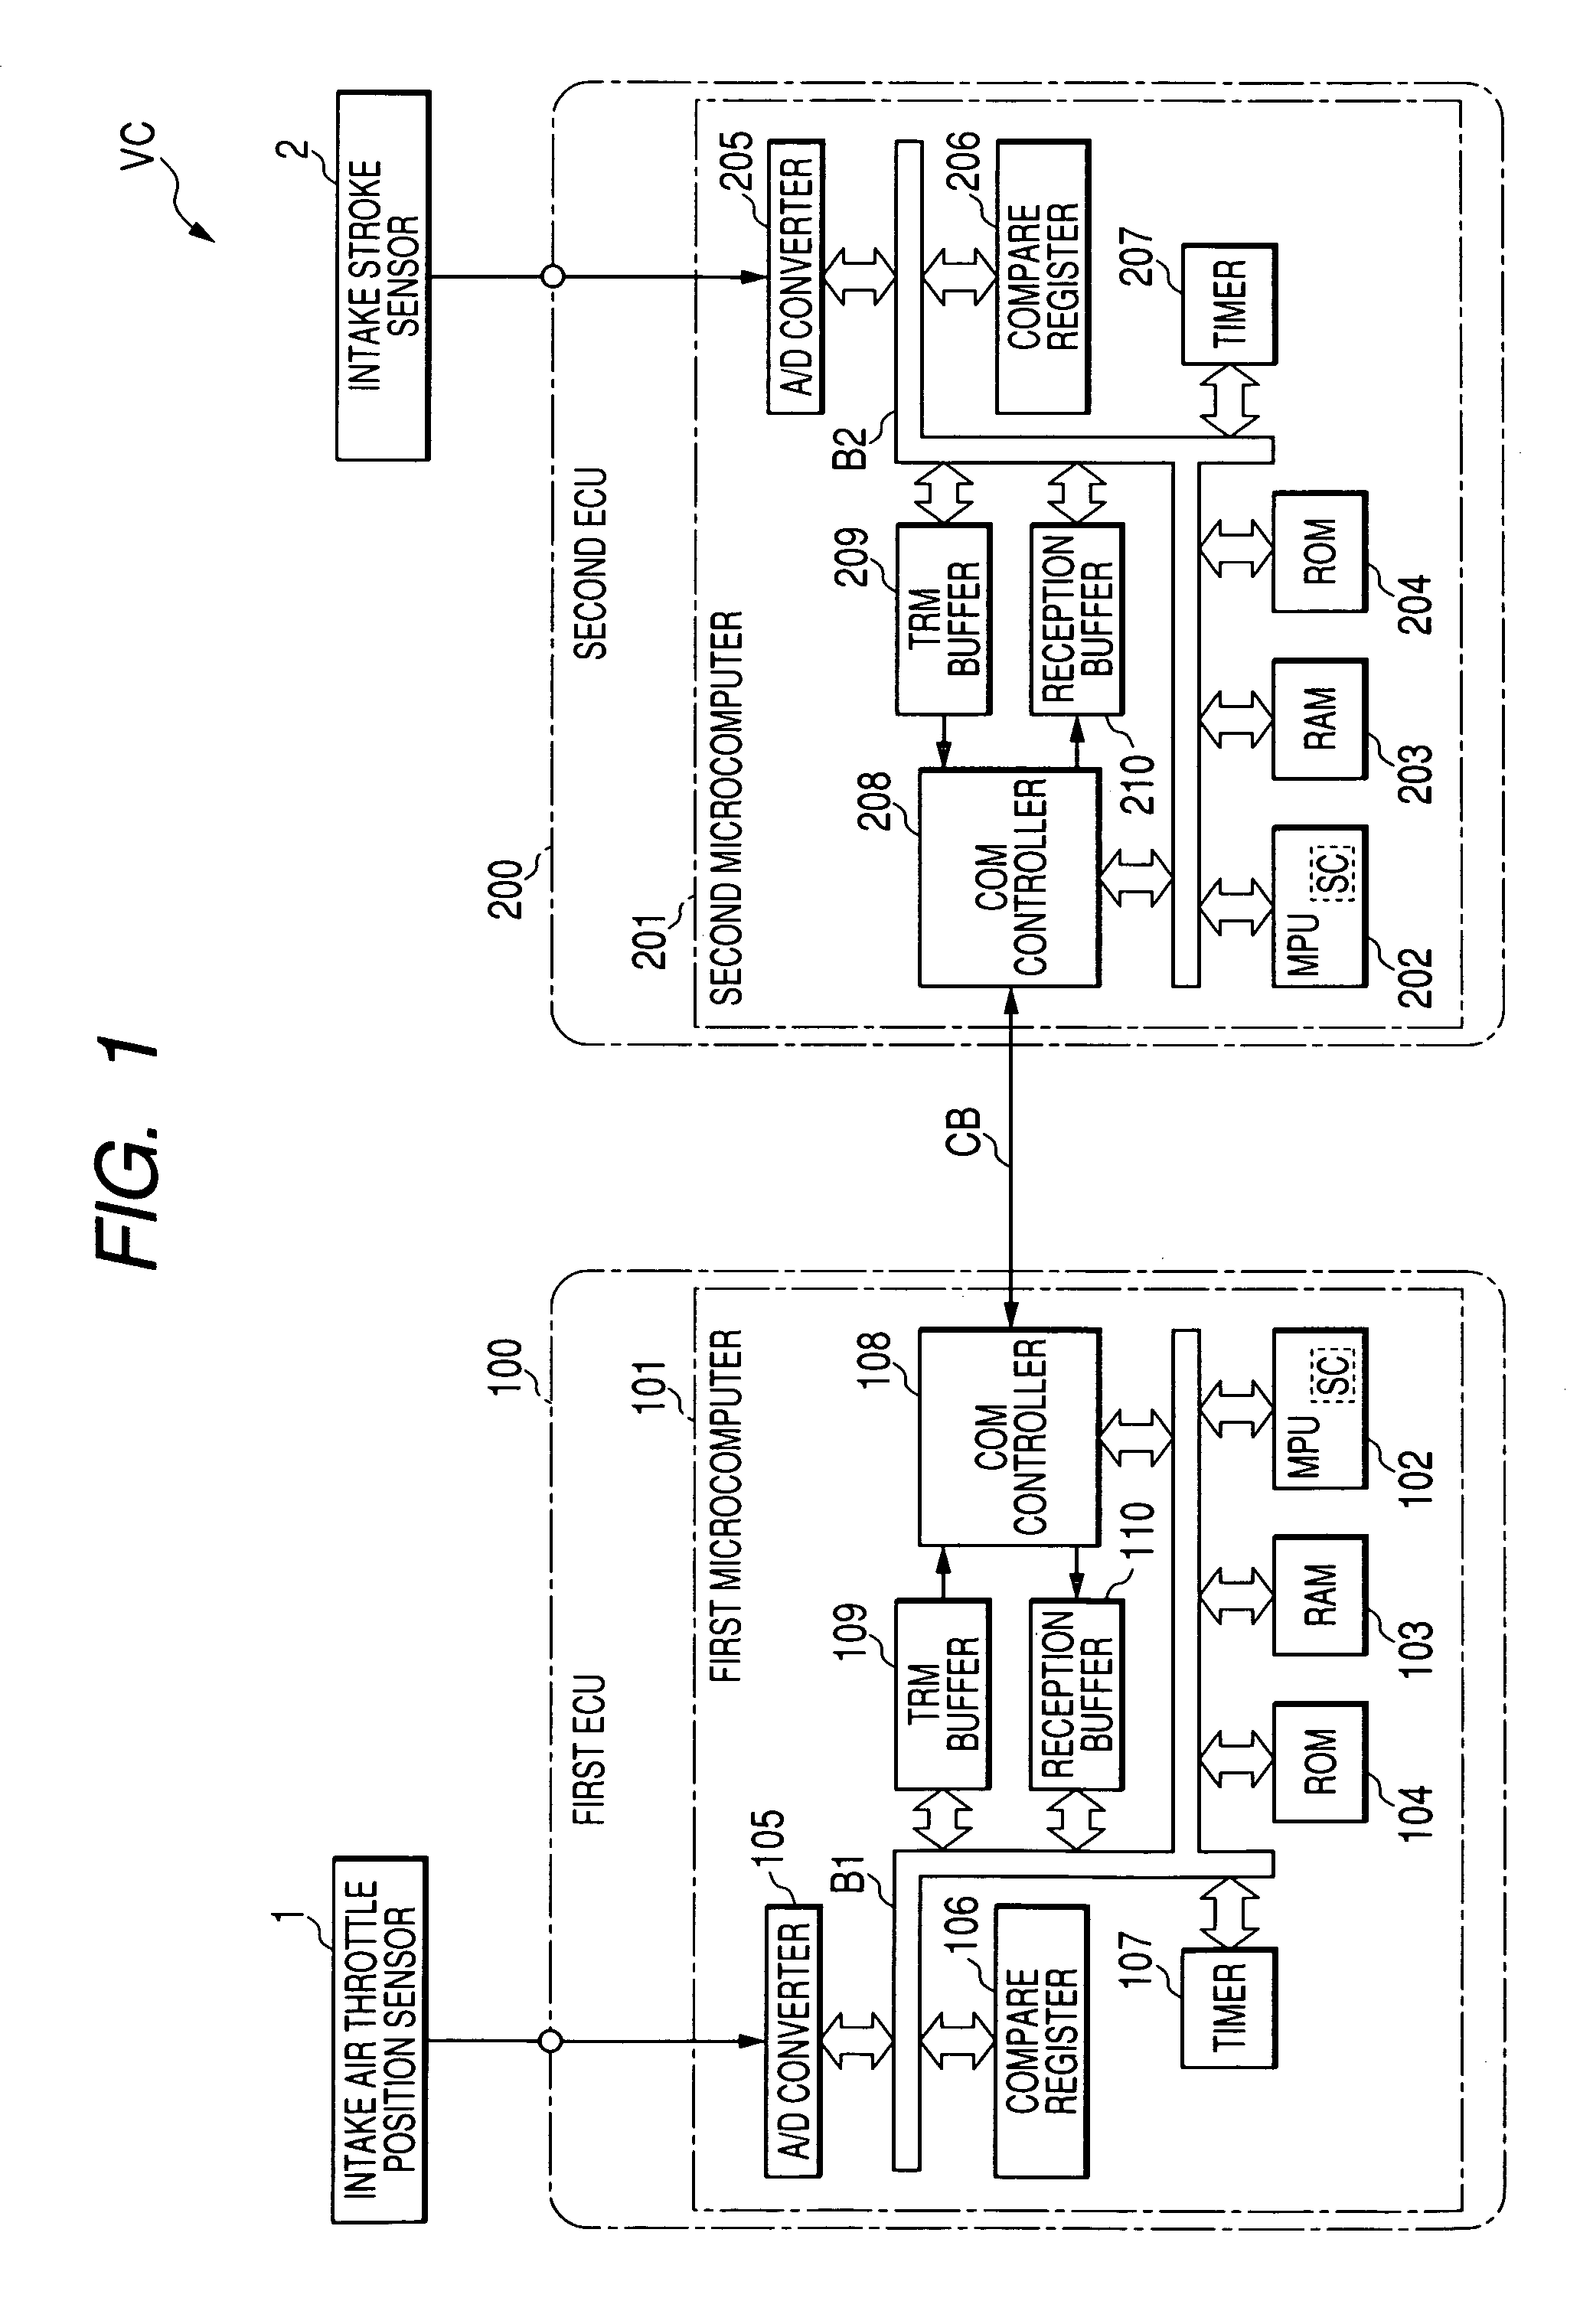 Distributed control system